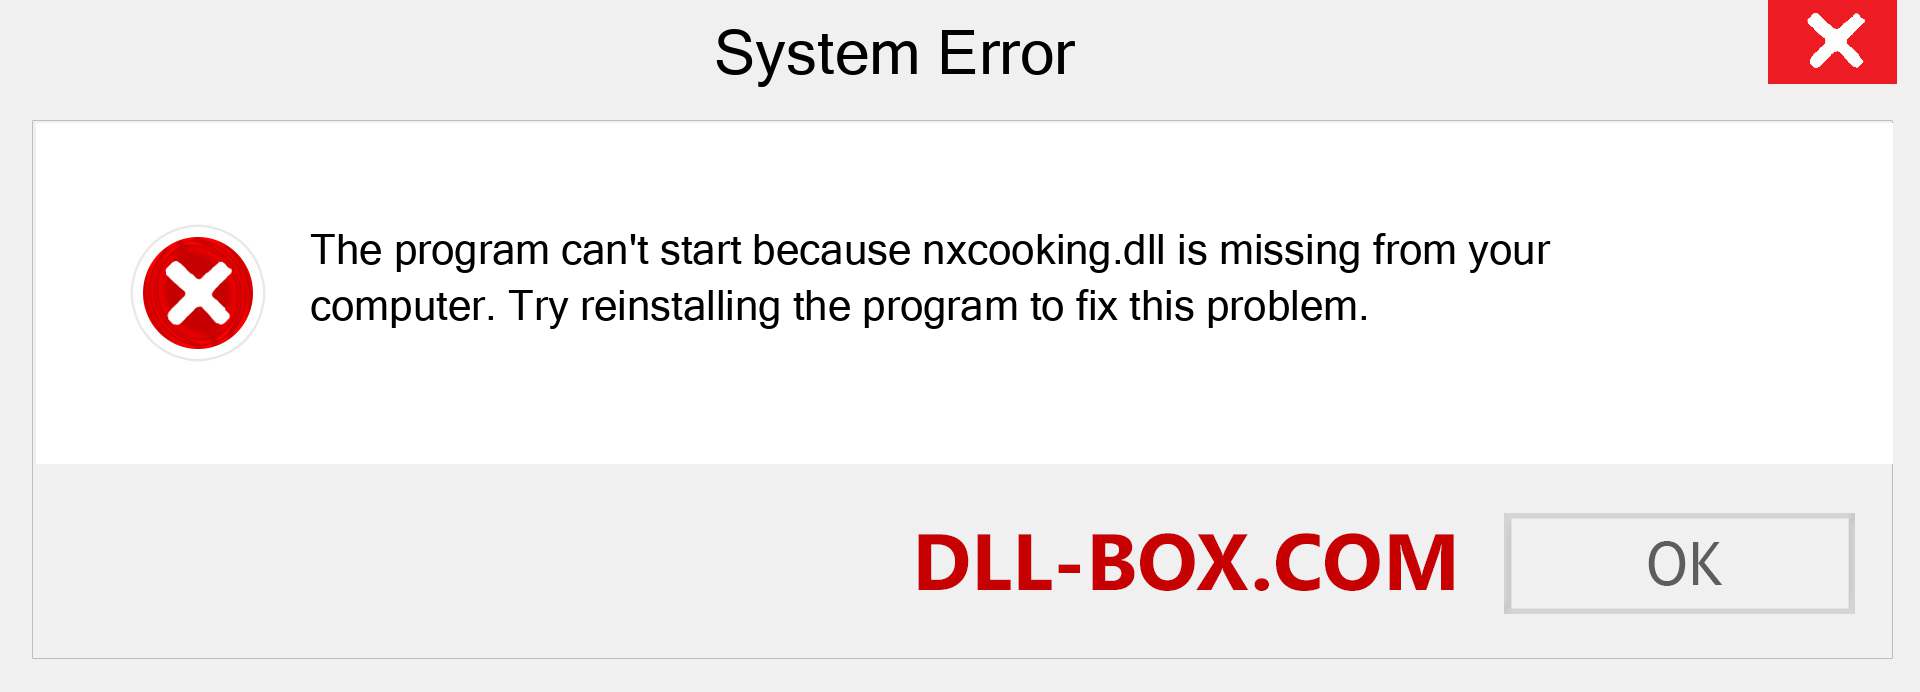  nxcooking.dll file is missing?. Download for Windows 7, 8, 10 - Fix  nxcooking dll Missing Error on Windows, photos, images